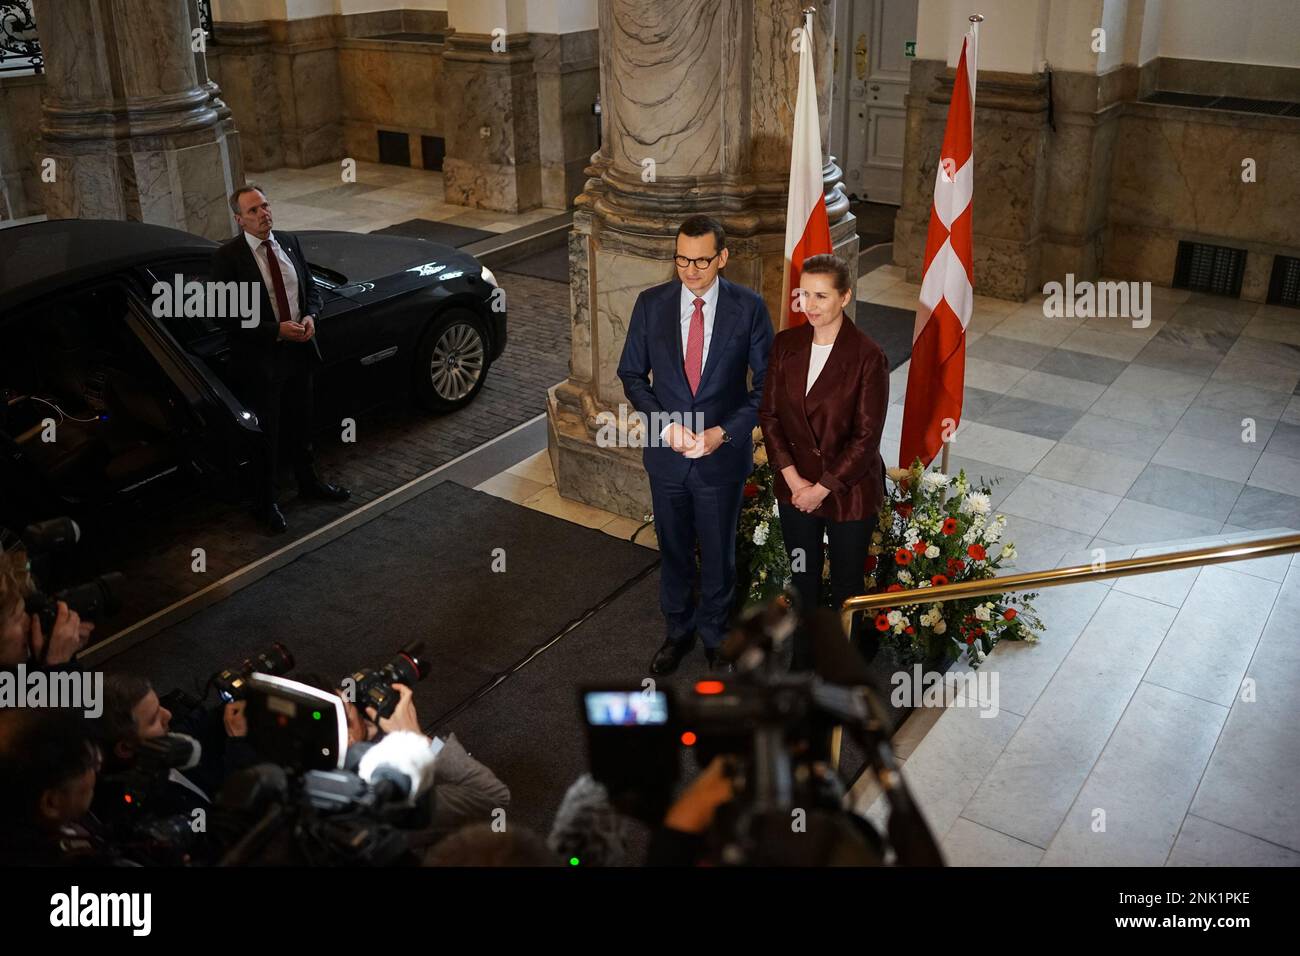 Denmark / Copenhagen  -  23/02/2023, Thibault Savary / Le Pictorium -  Polish PM in Denmark for a meeting with Danish PM Mette Frederiksen regarding the first year of war in Ukraine. -  23/2/2023  -  Denmark / Copenhagen  -  Danish PM Mette Frederiksen is welcoming Polish PM Mateusz Morawiecki in Christiansborg for a meeting regarding the first year of the conflict in Ukraine. Stock Photo